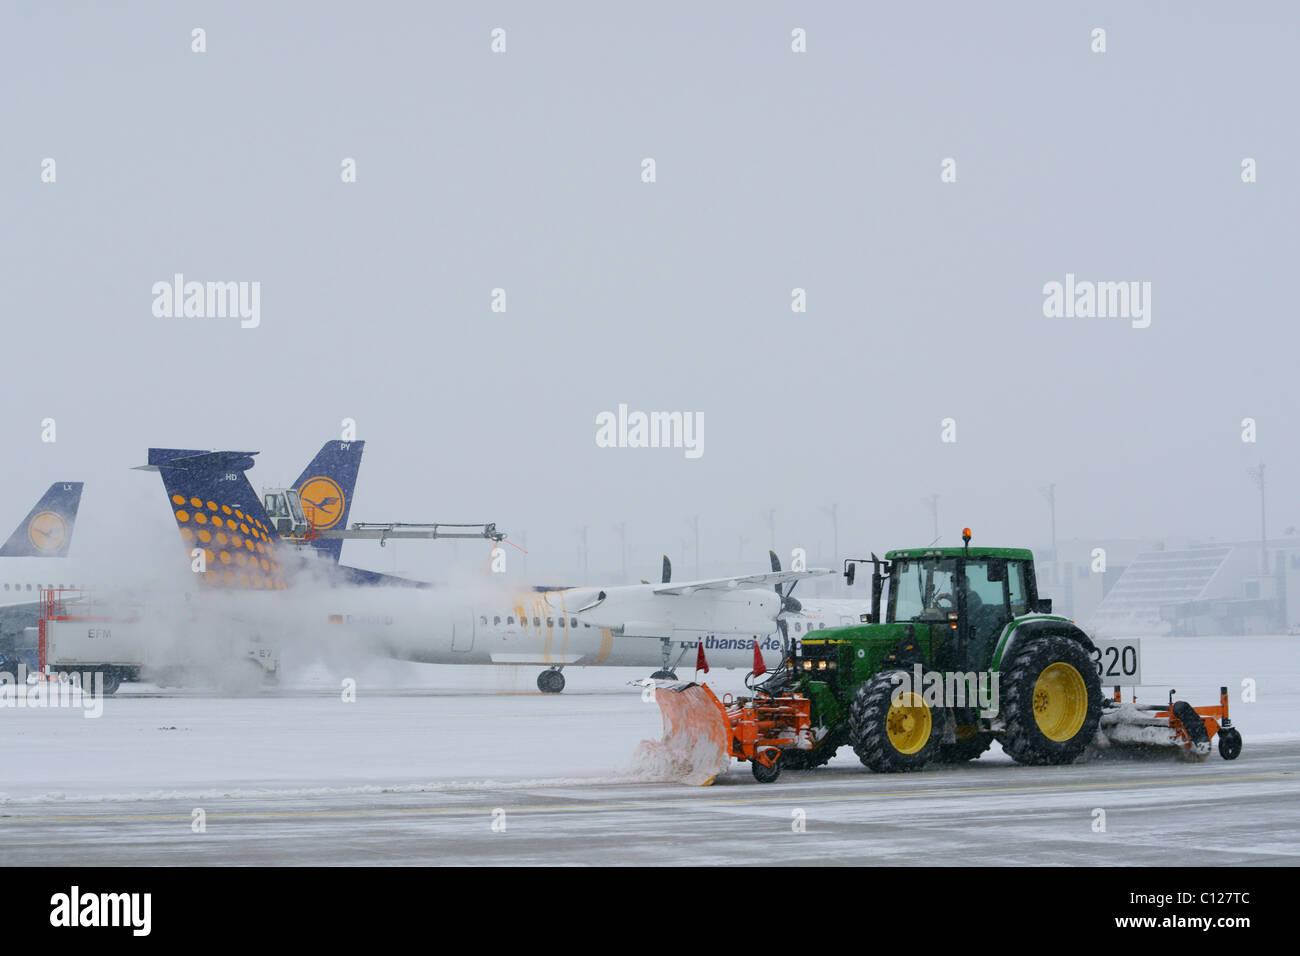 Snow, winter, snow removal with tractors, aircraft, taxiway, Terminal 2, east apron, Munich Airport, MUC, Bavaria Stock Photo